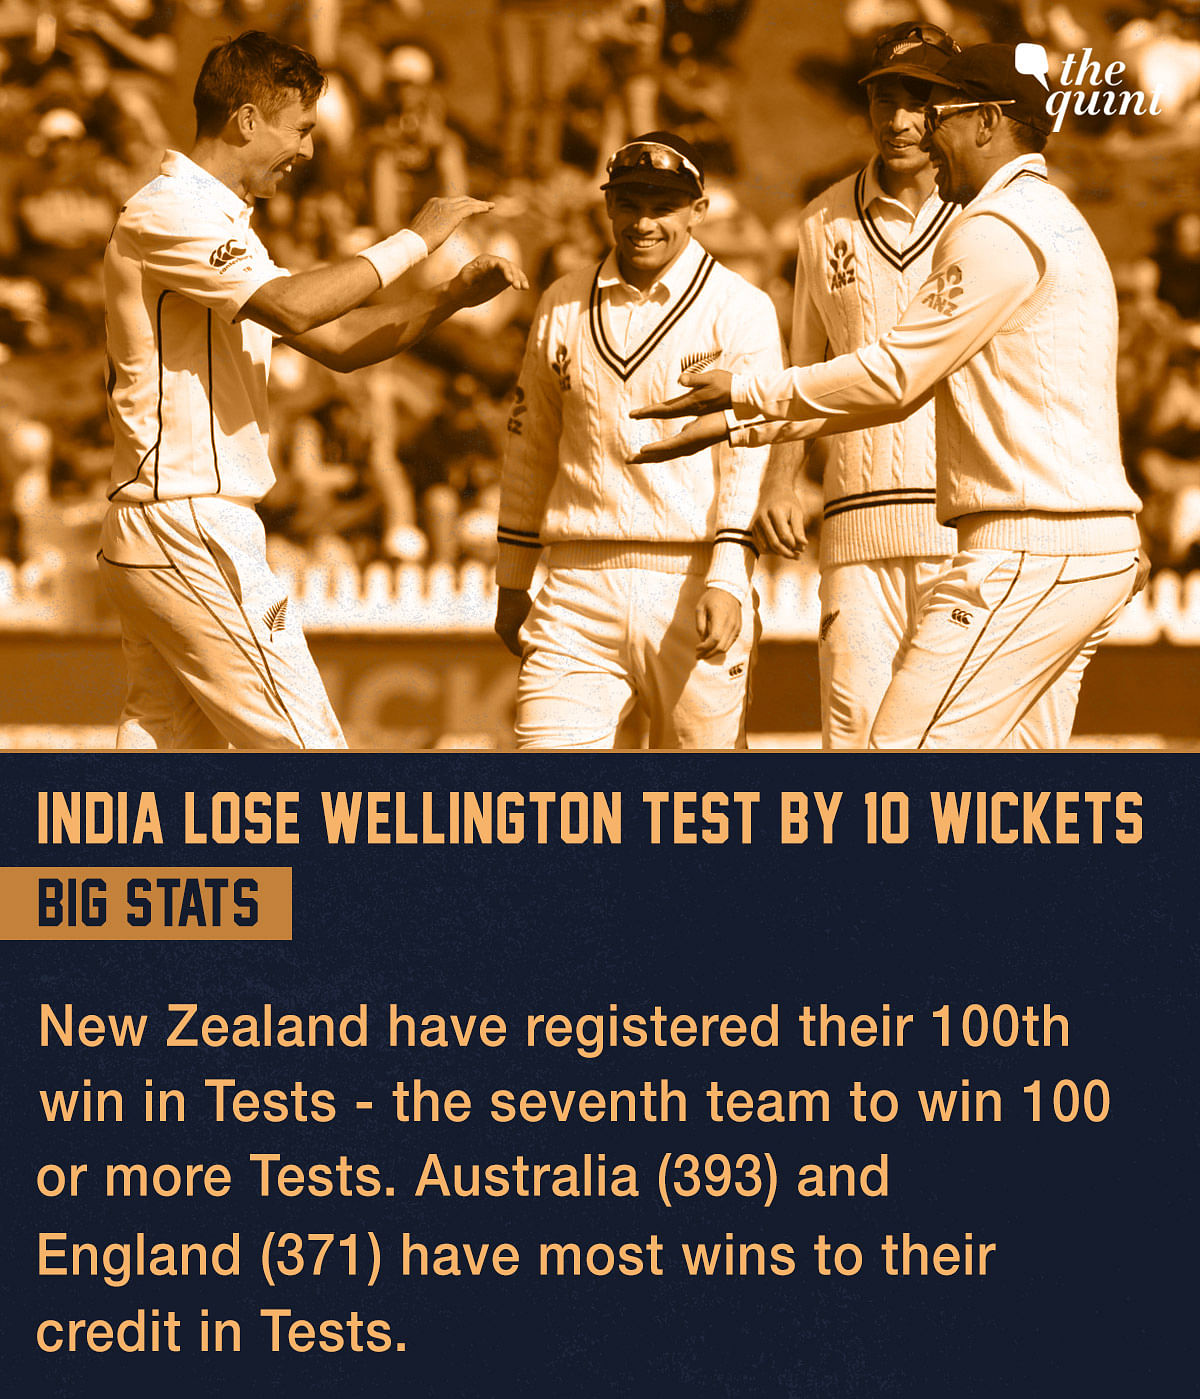 Here’s a look at some of the records and numbers from the first Test between India and New Zealand at Wellington.